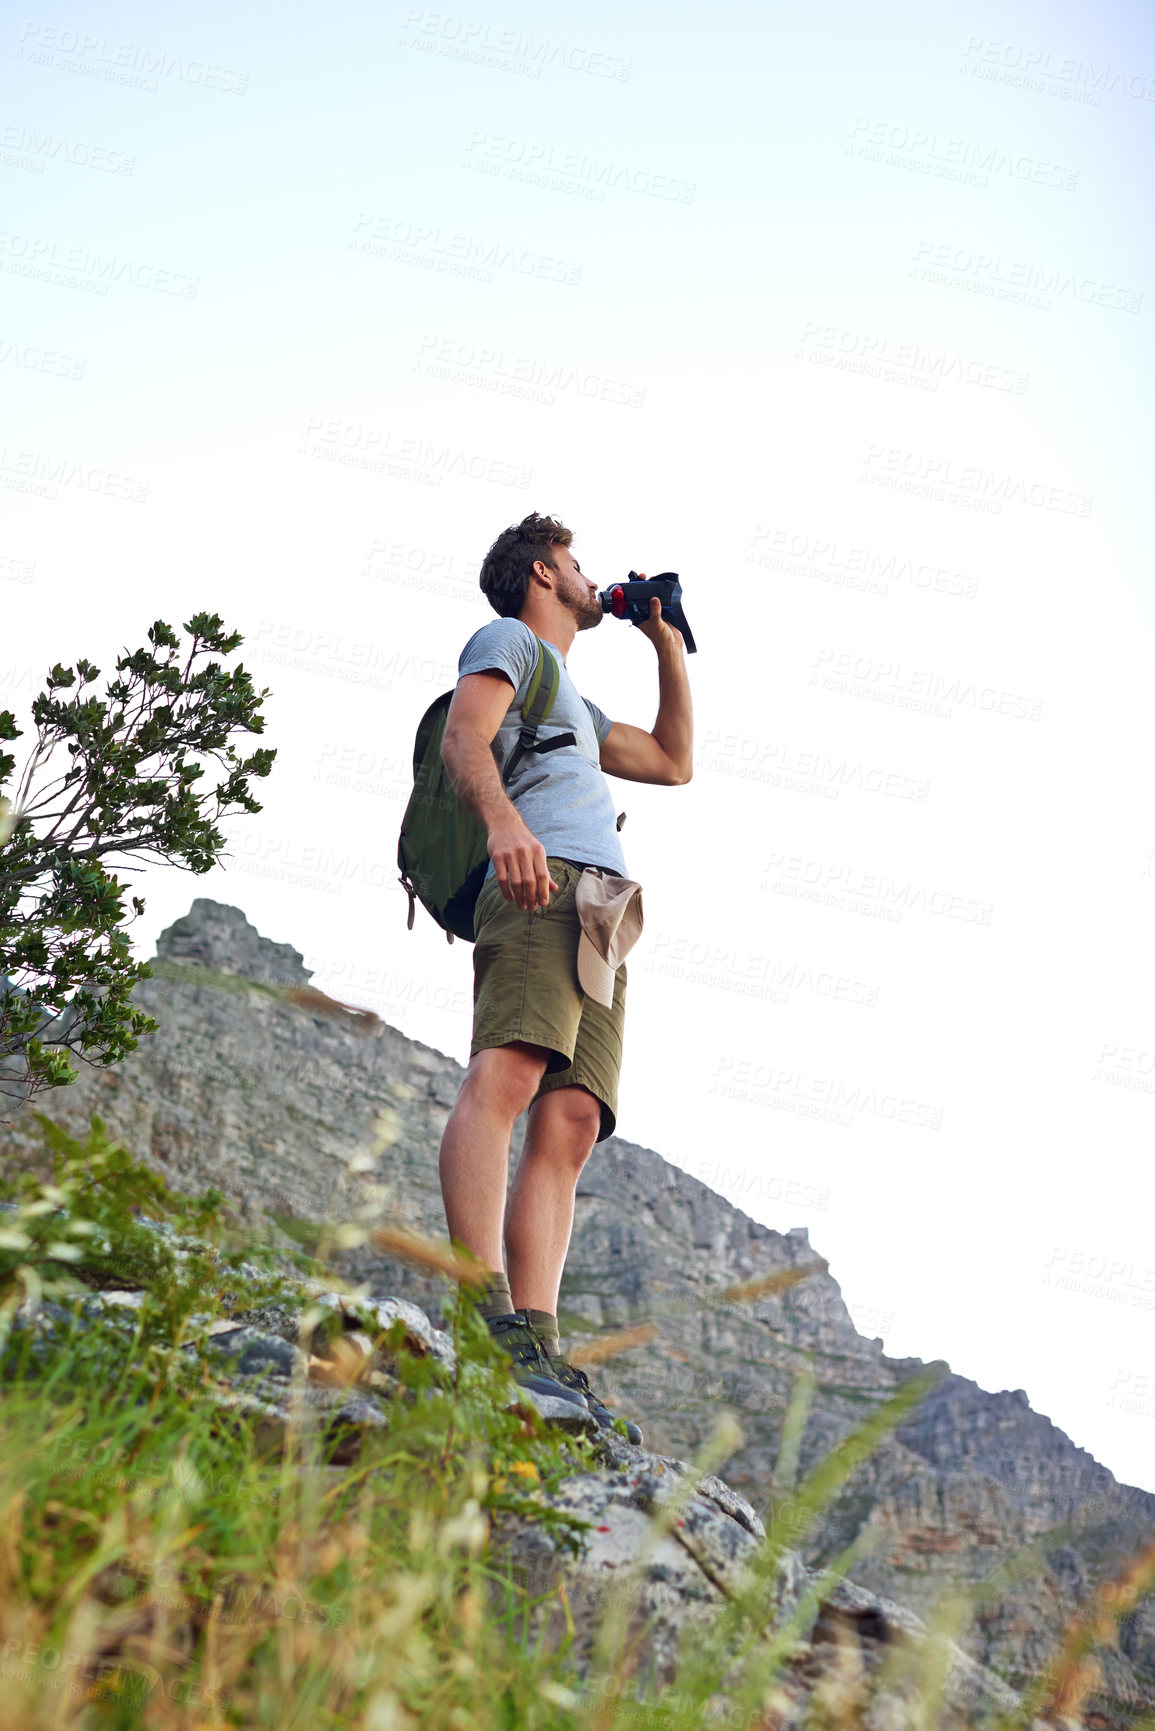 Buy stock photo Shot of a handsome young man taking a drink of water while hiking